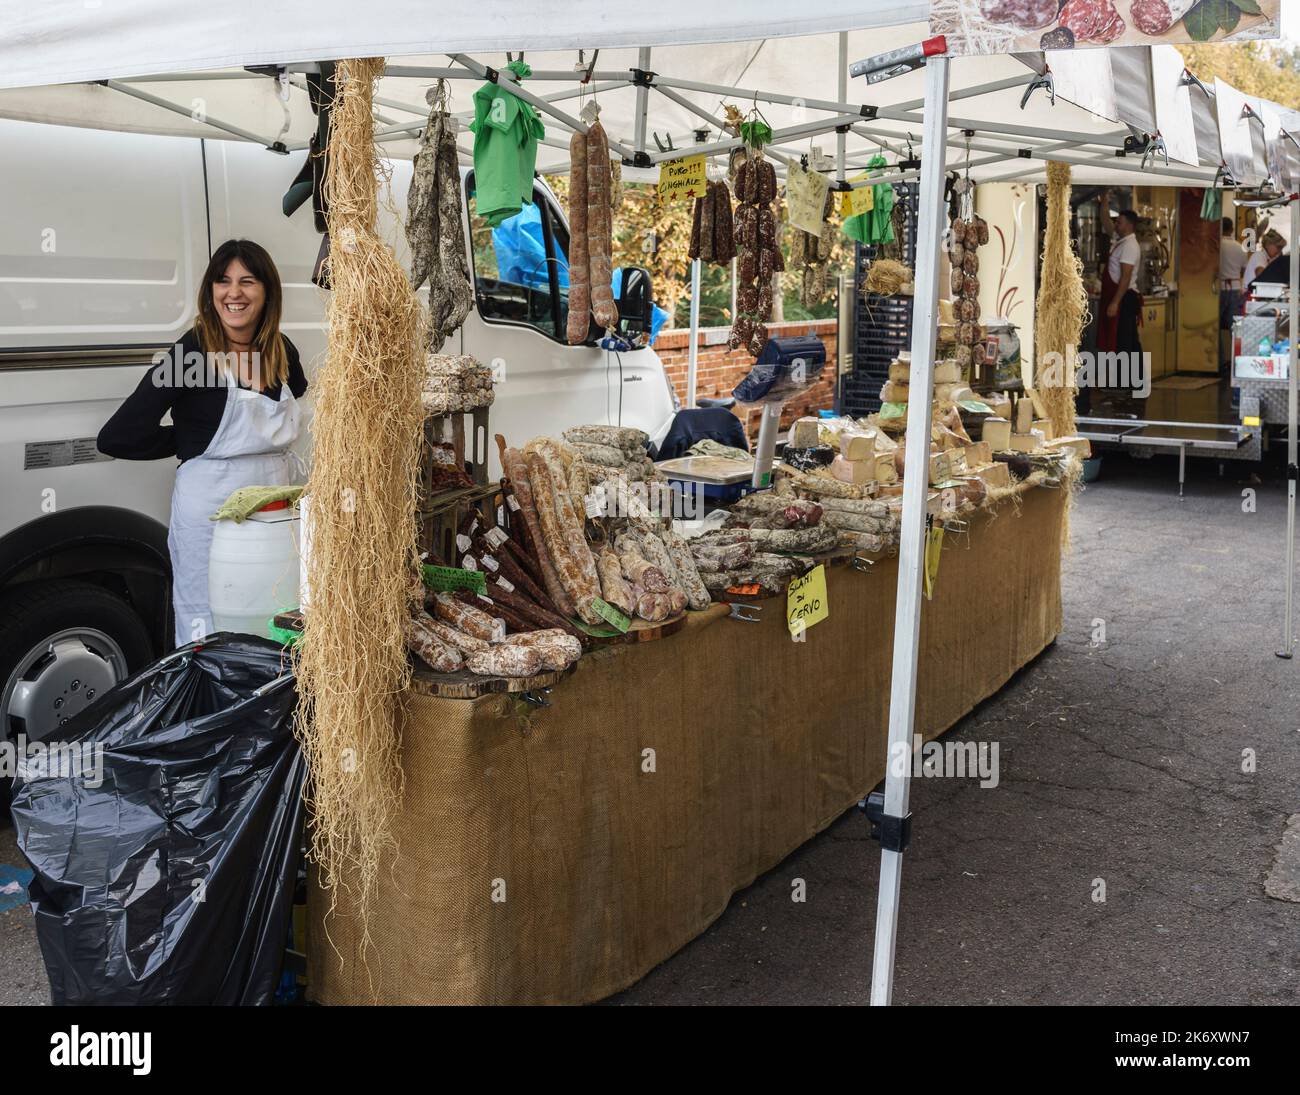 Alba, Piedmont, Italy - October 15, 2022: Stall selling cured meats and cheeses in a farmer's market. Stock Photo